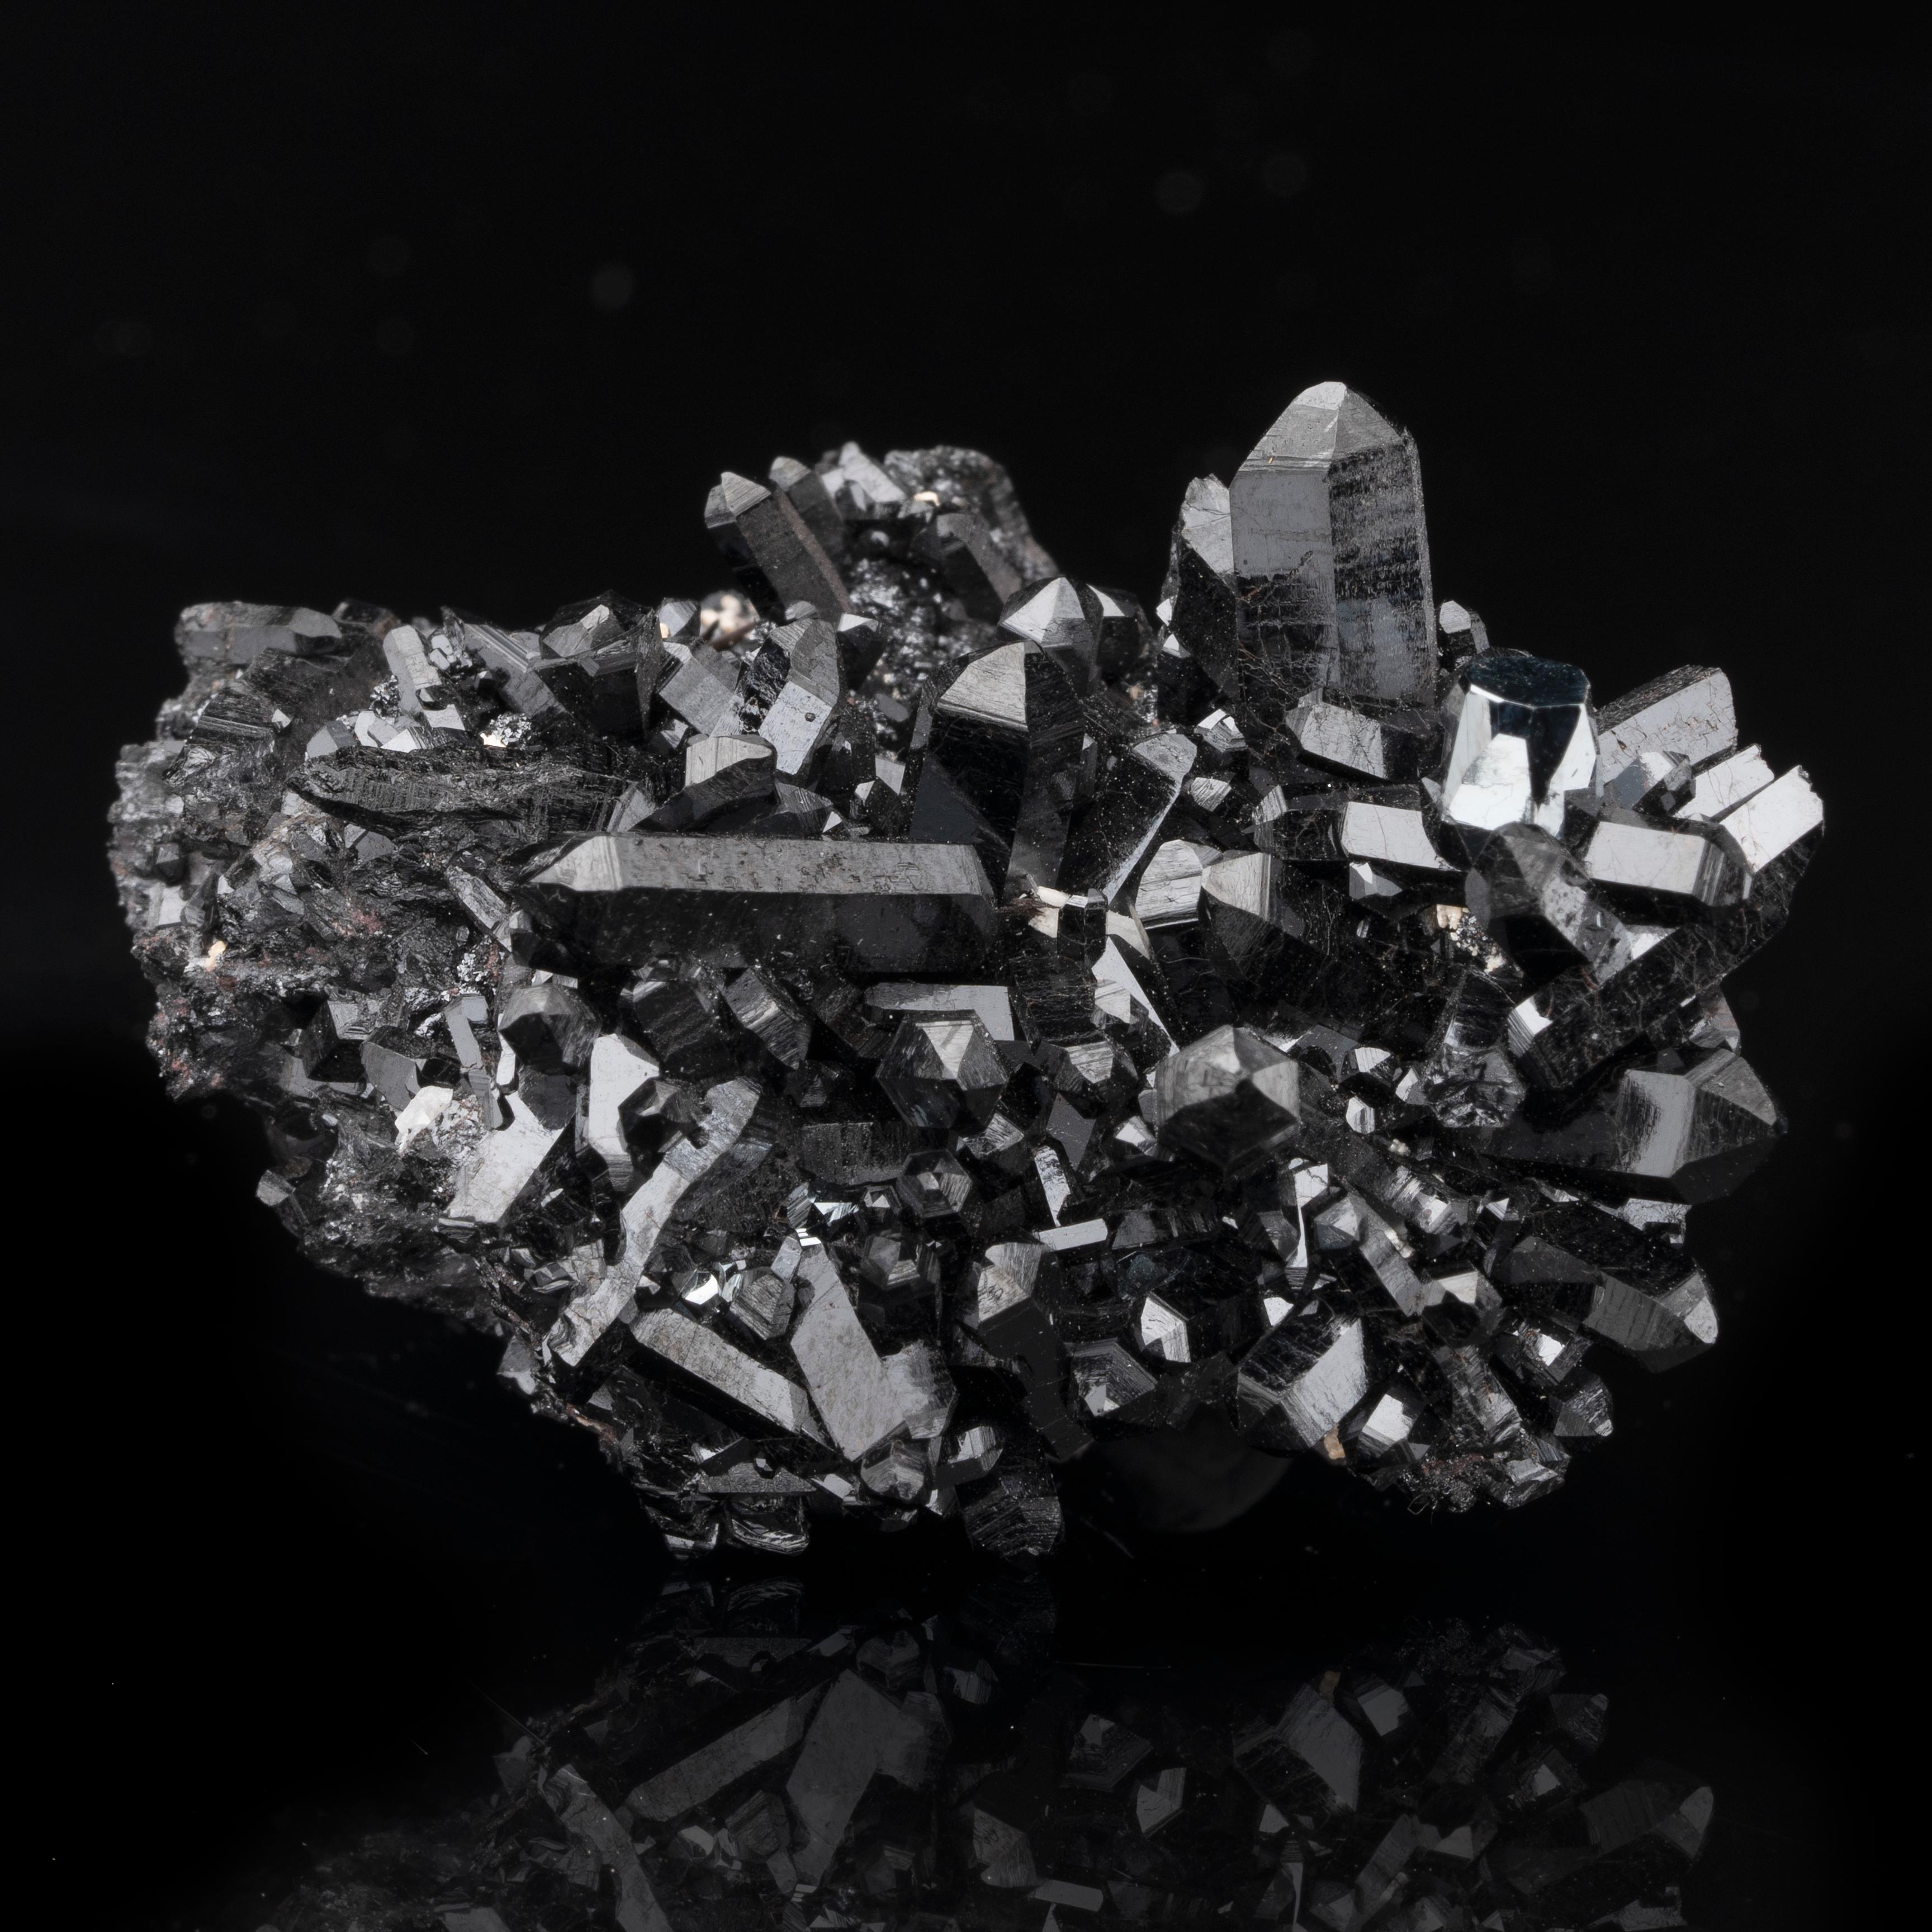 From N'Chwaning I Mine, Kuruman, Cape Province, South Africa, this lustrous, stark black, sharply hexagonally crystallized specimen of gaudefroyite with hematite brings unexpected presence. The uncommon mineral gaudefroyite is found in manganese